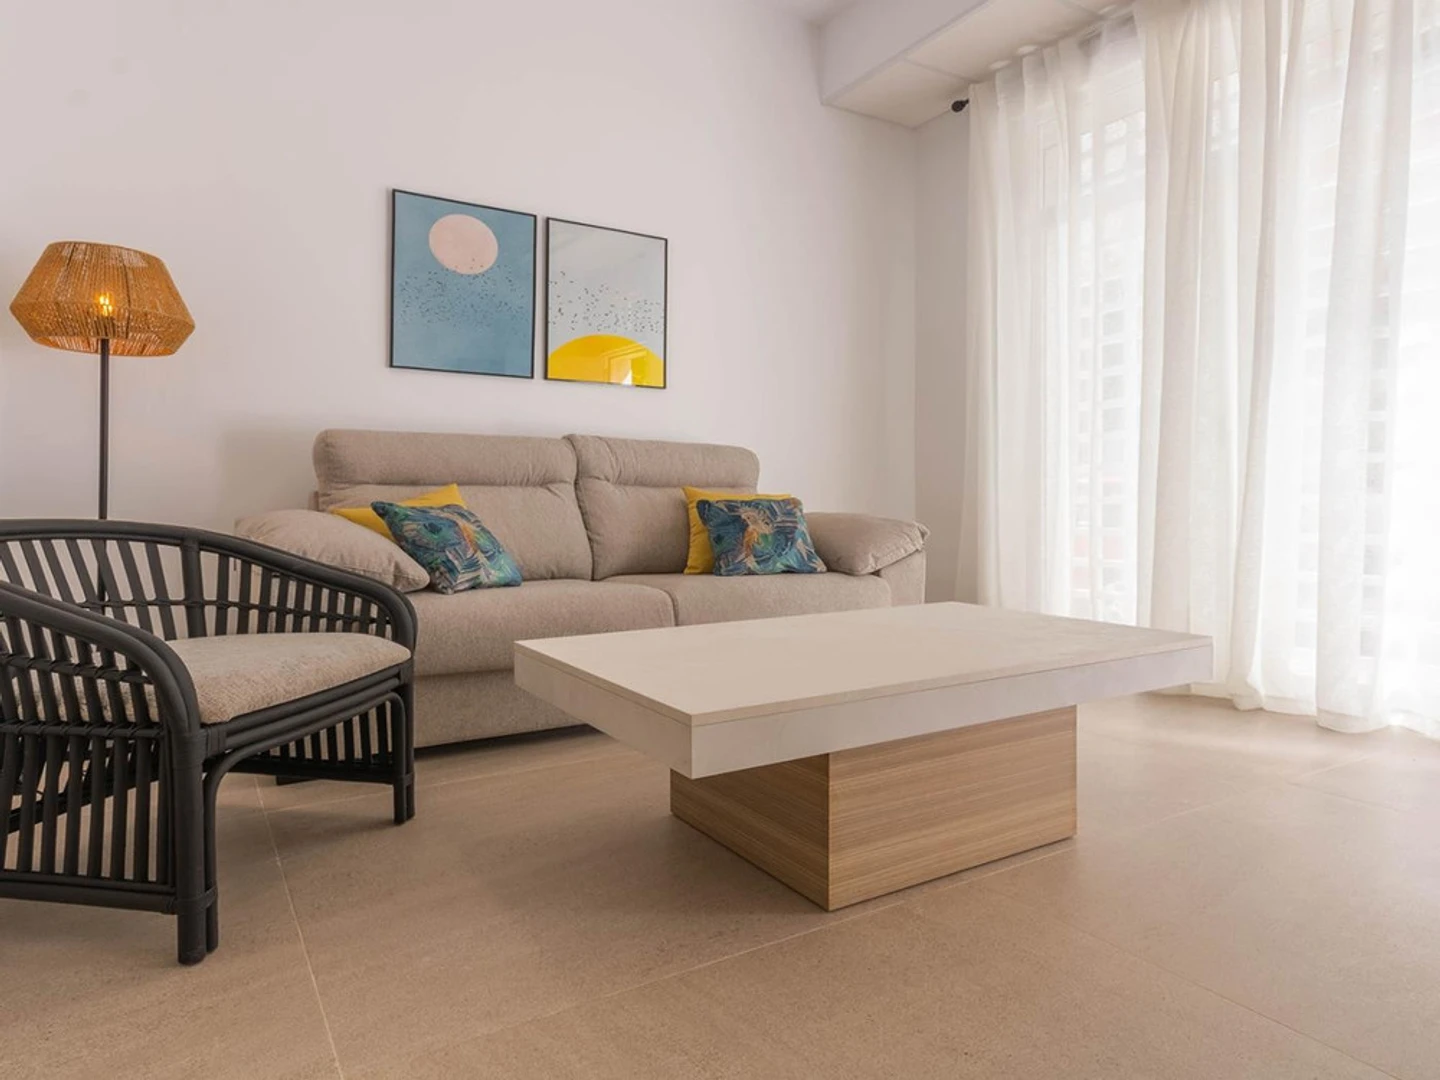 Two bedroom accommodation in Córdoba